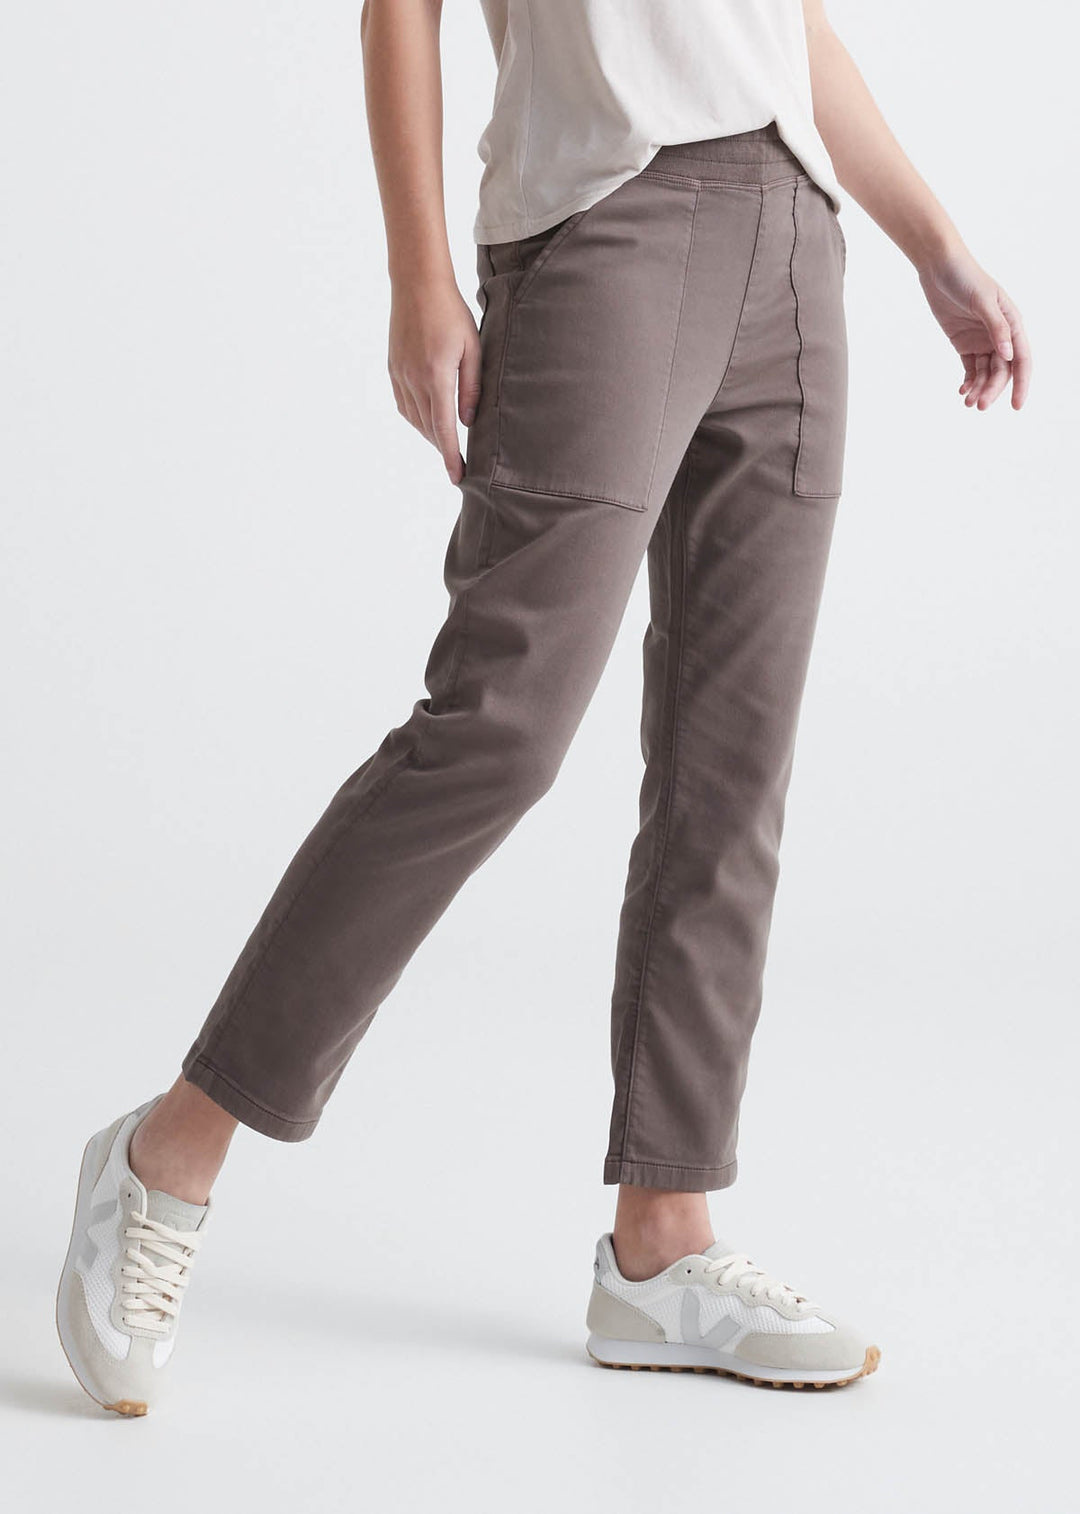 Duer No Sweat Everyday Pants, 27 Inseam - Womens, FREE SHIPPING in Canada